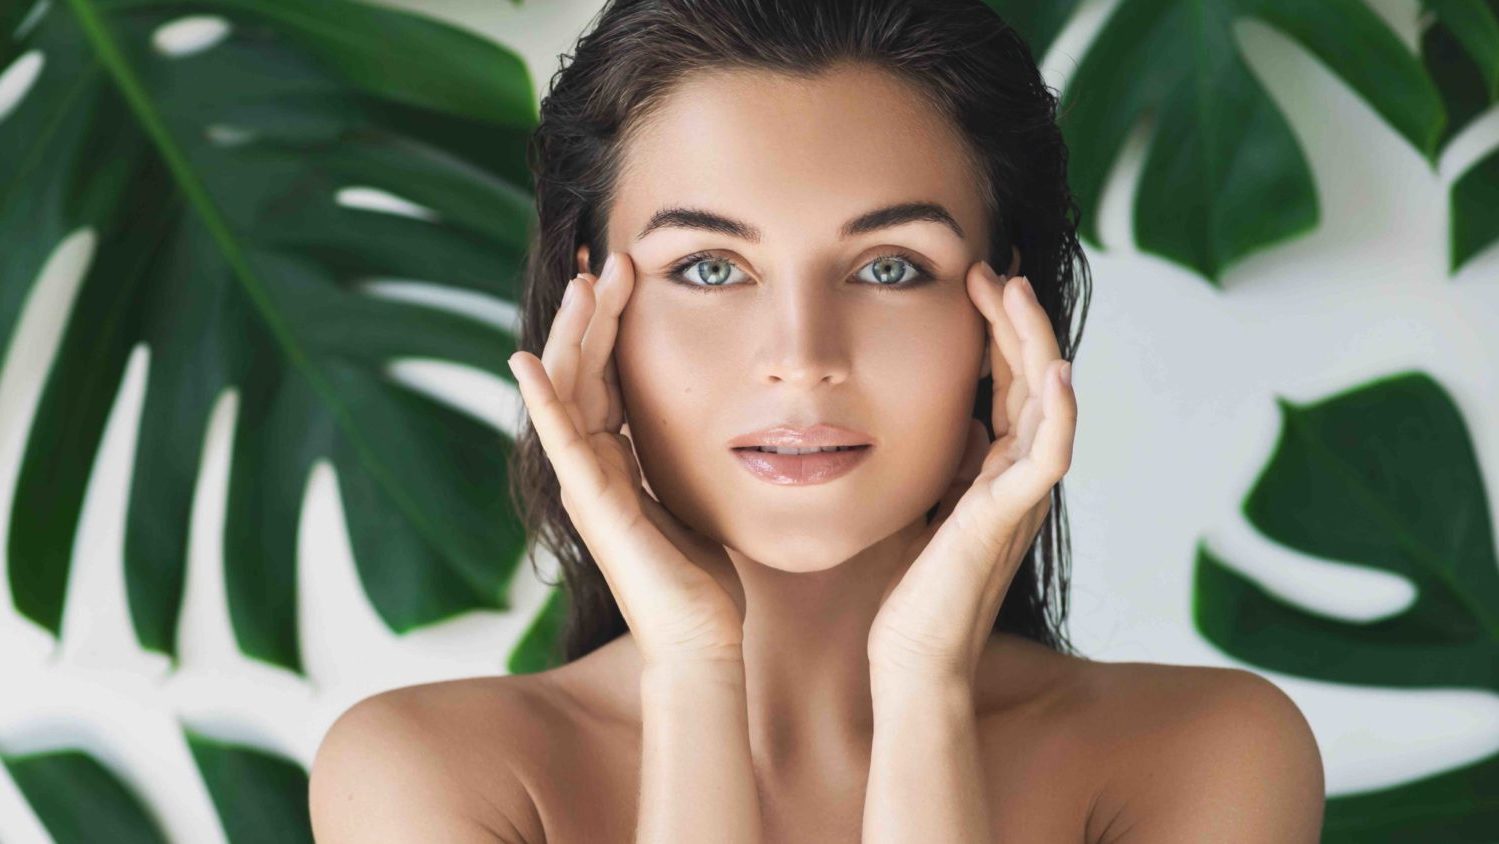 Everything You Need to Know About the Halo Laser Treatment